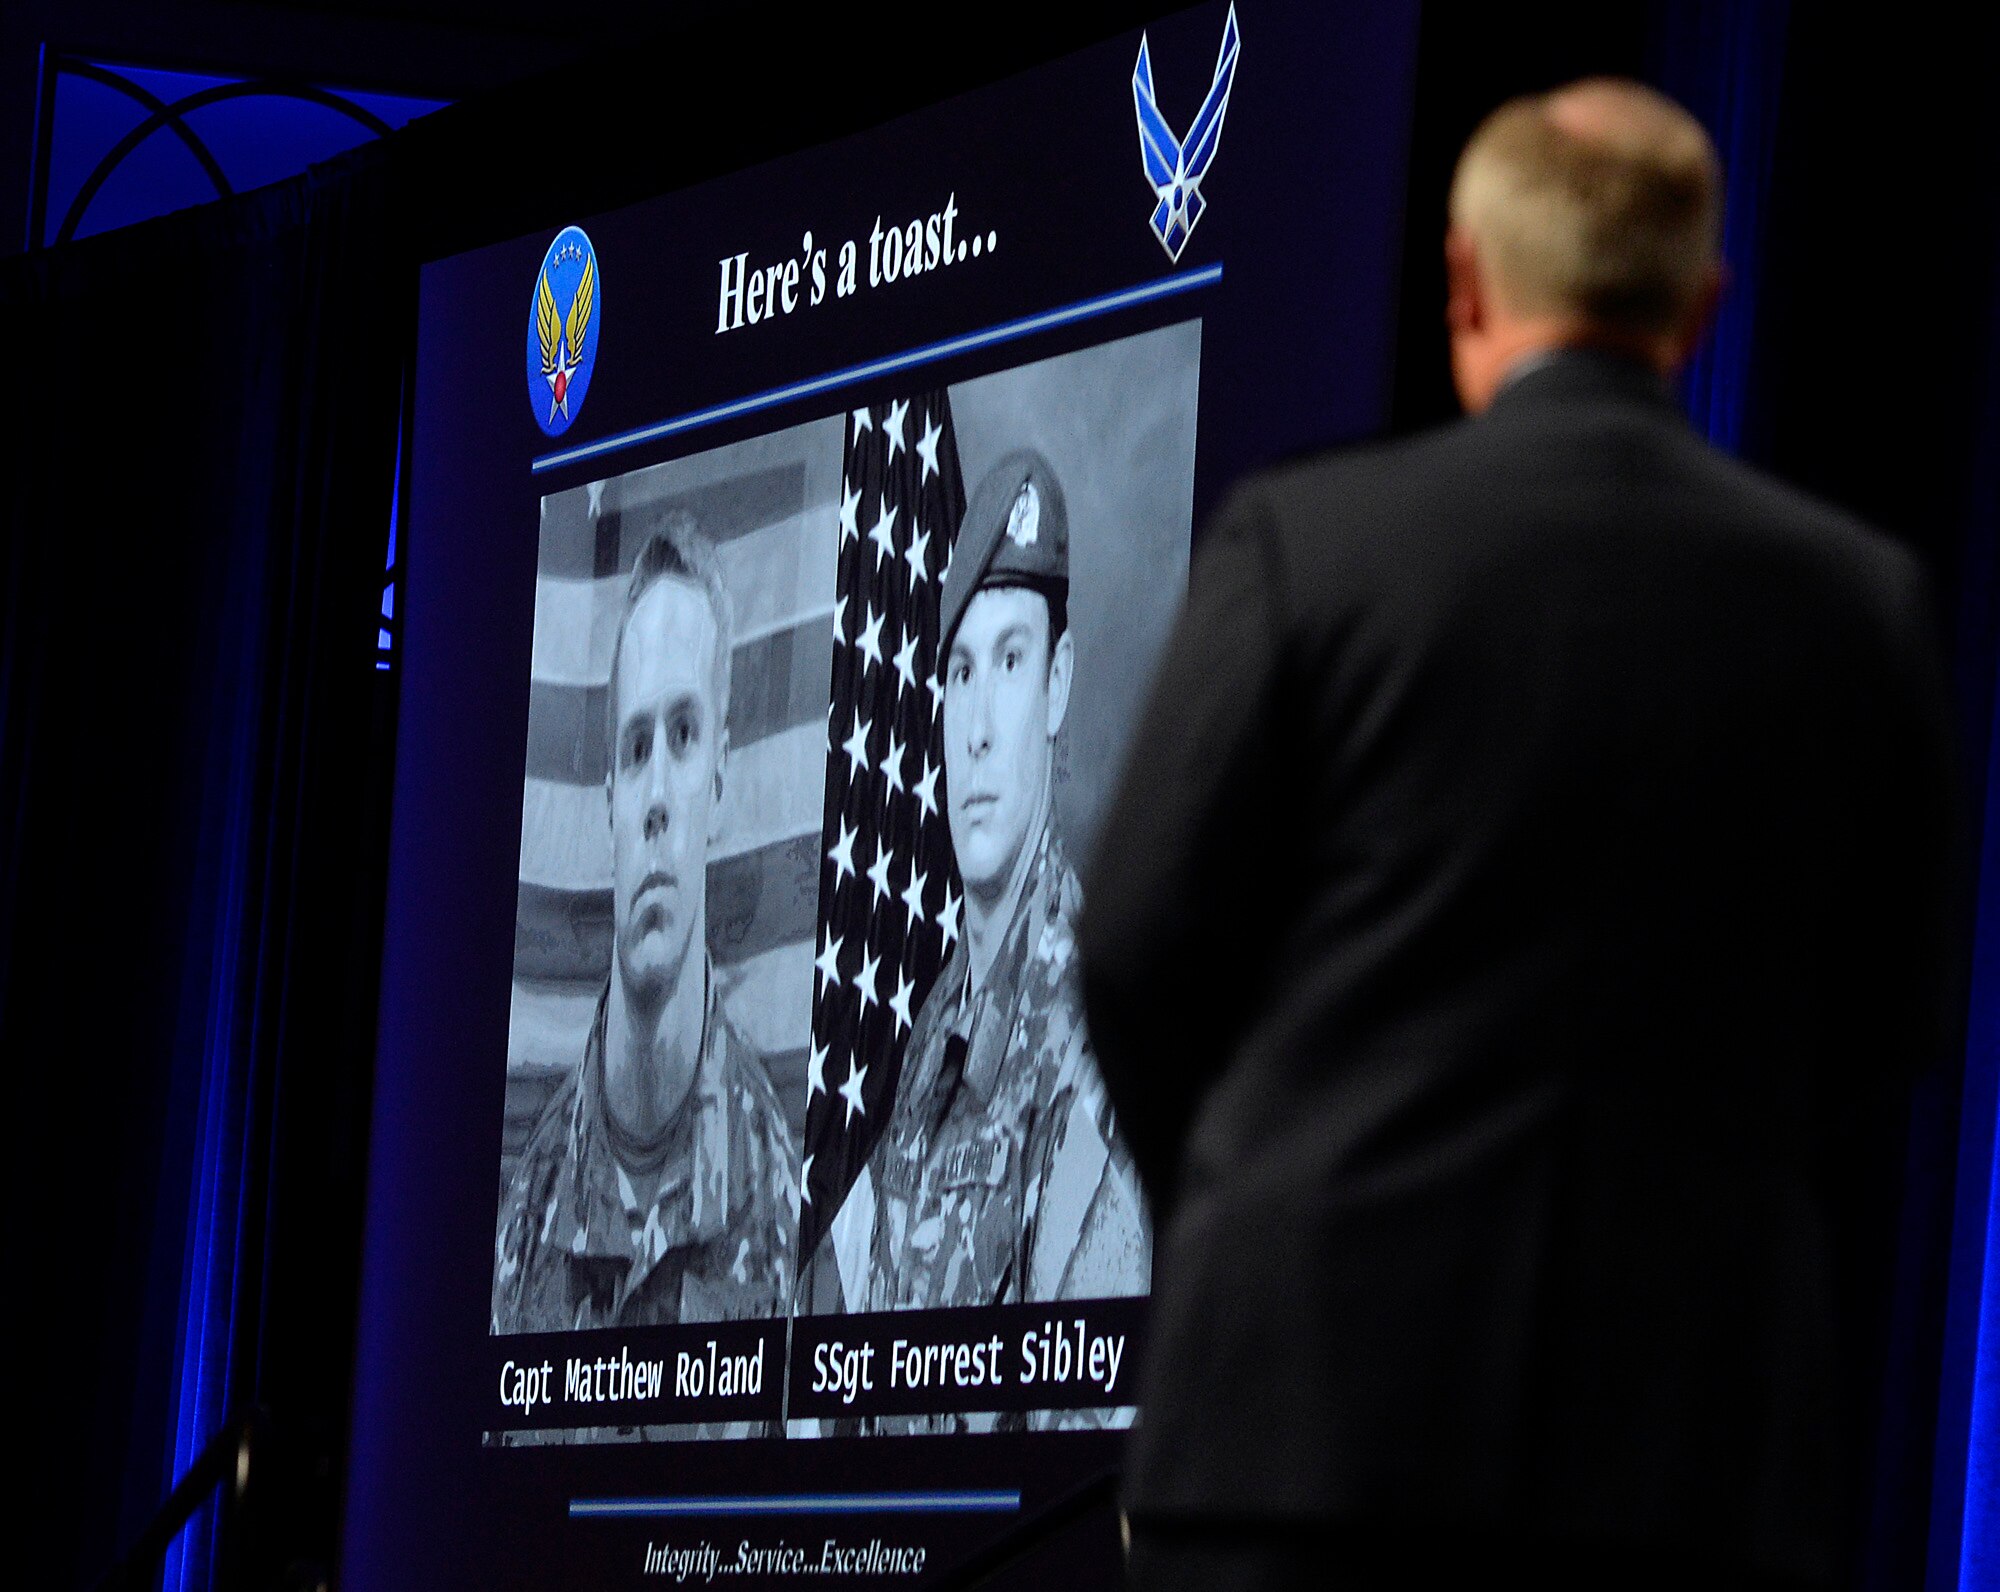 Air Force Chief of Staff Gen. Mark A. Welsh III honors two fallen special tactics Airmen during his Air Force Update address at the Air Force Association's Air and Space Conference and Technology Exposition Sept. 15, 2015, in Washington, D.C.  Capt. Matthew D. Roland and Staff Sgt. Forrest B. Sibley were killed Aug. 26, 2015, in Afghanistan. (U.S. Air Force photo/Scott M. Ash)  